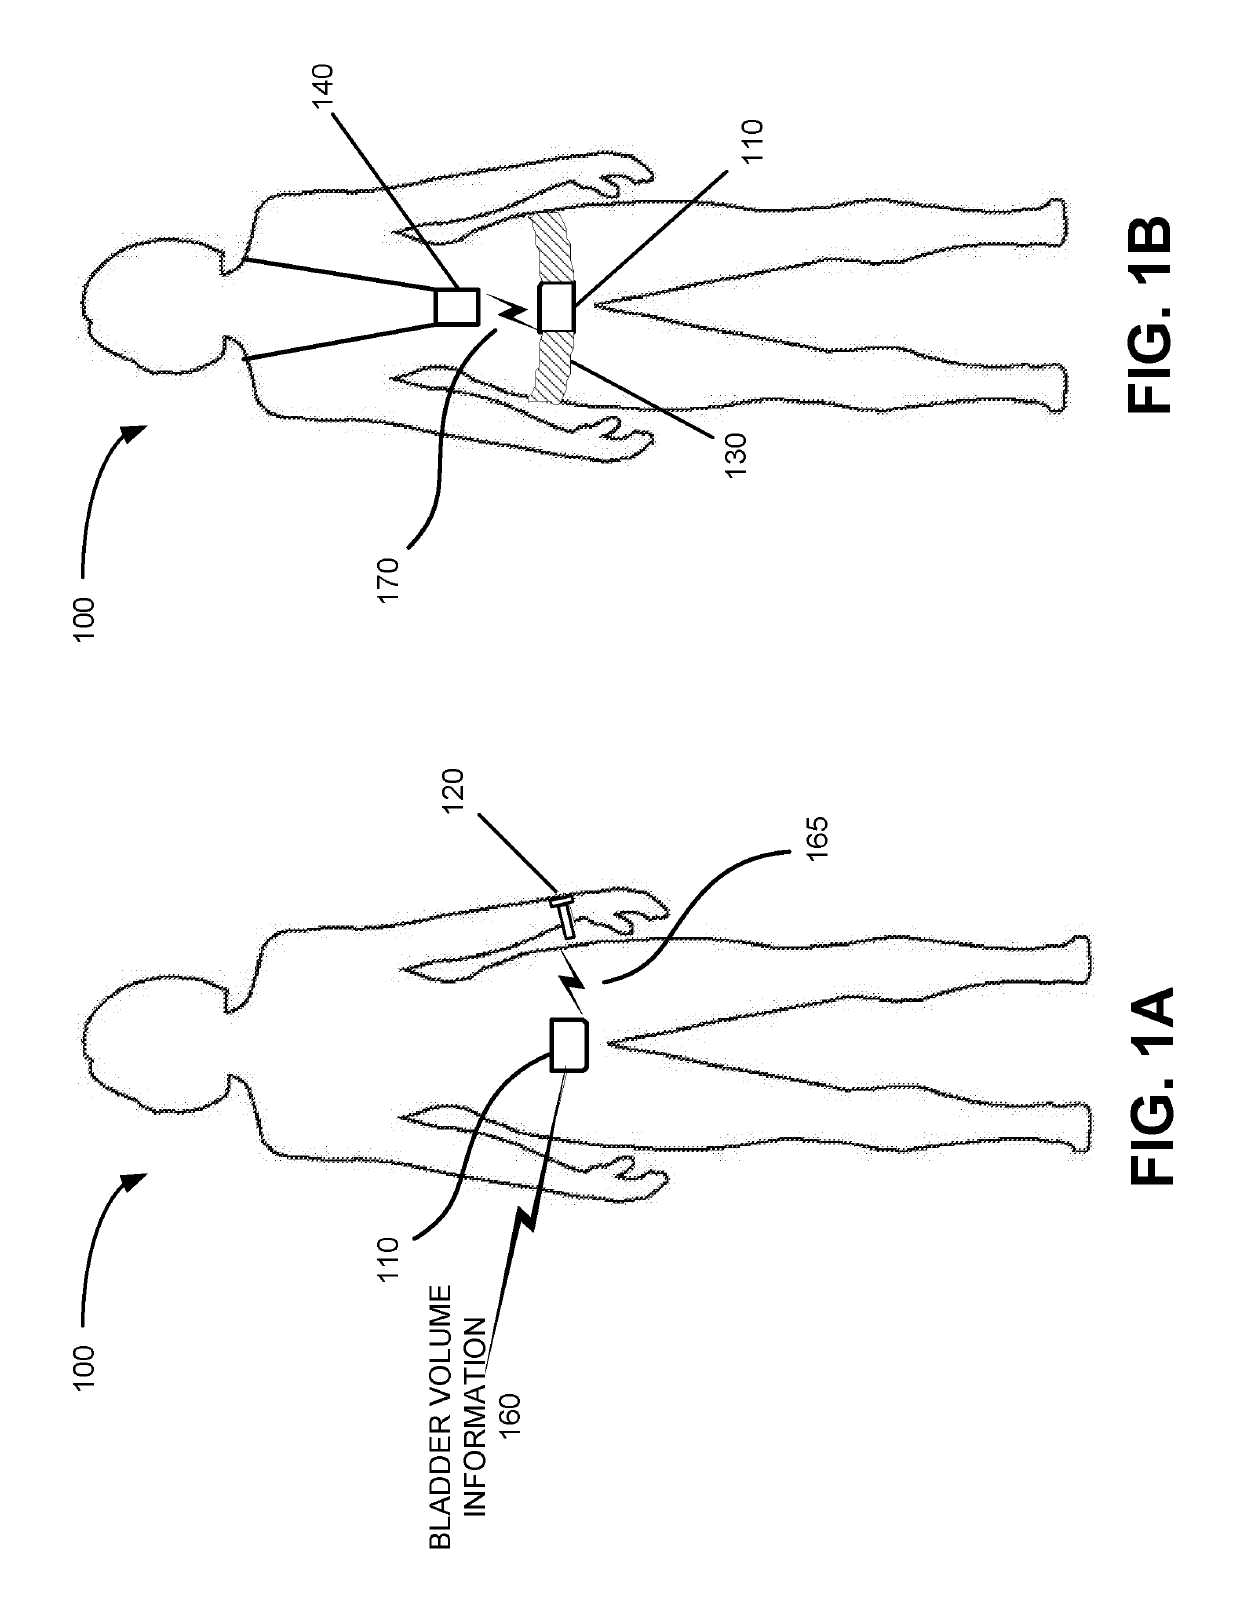 Systems and methods for bladder health management